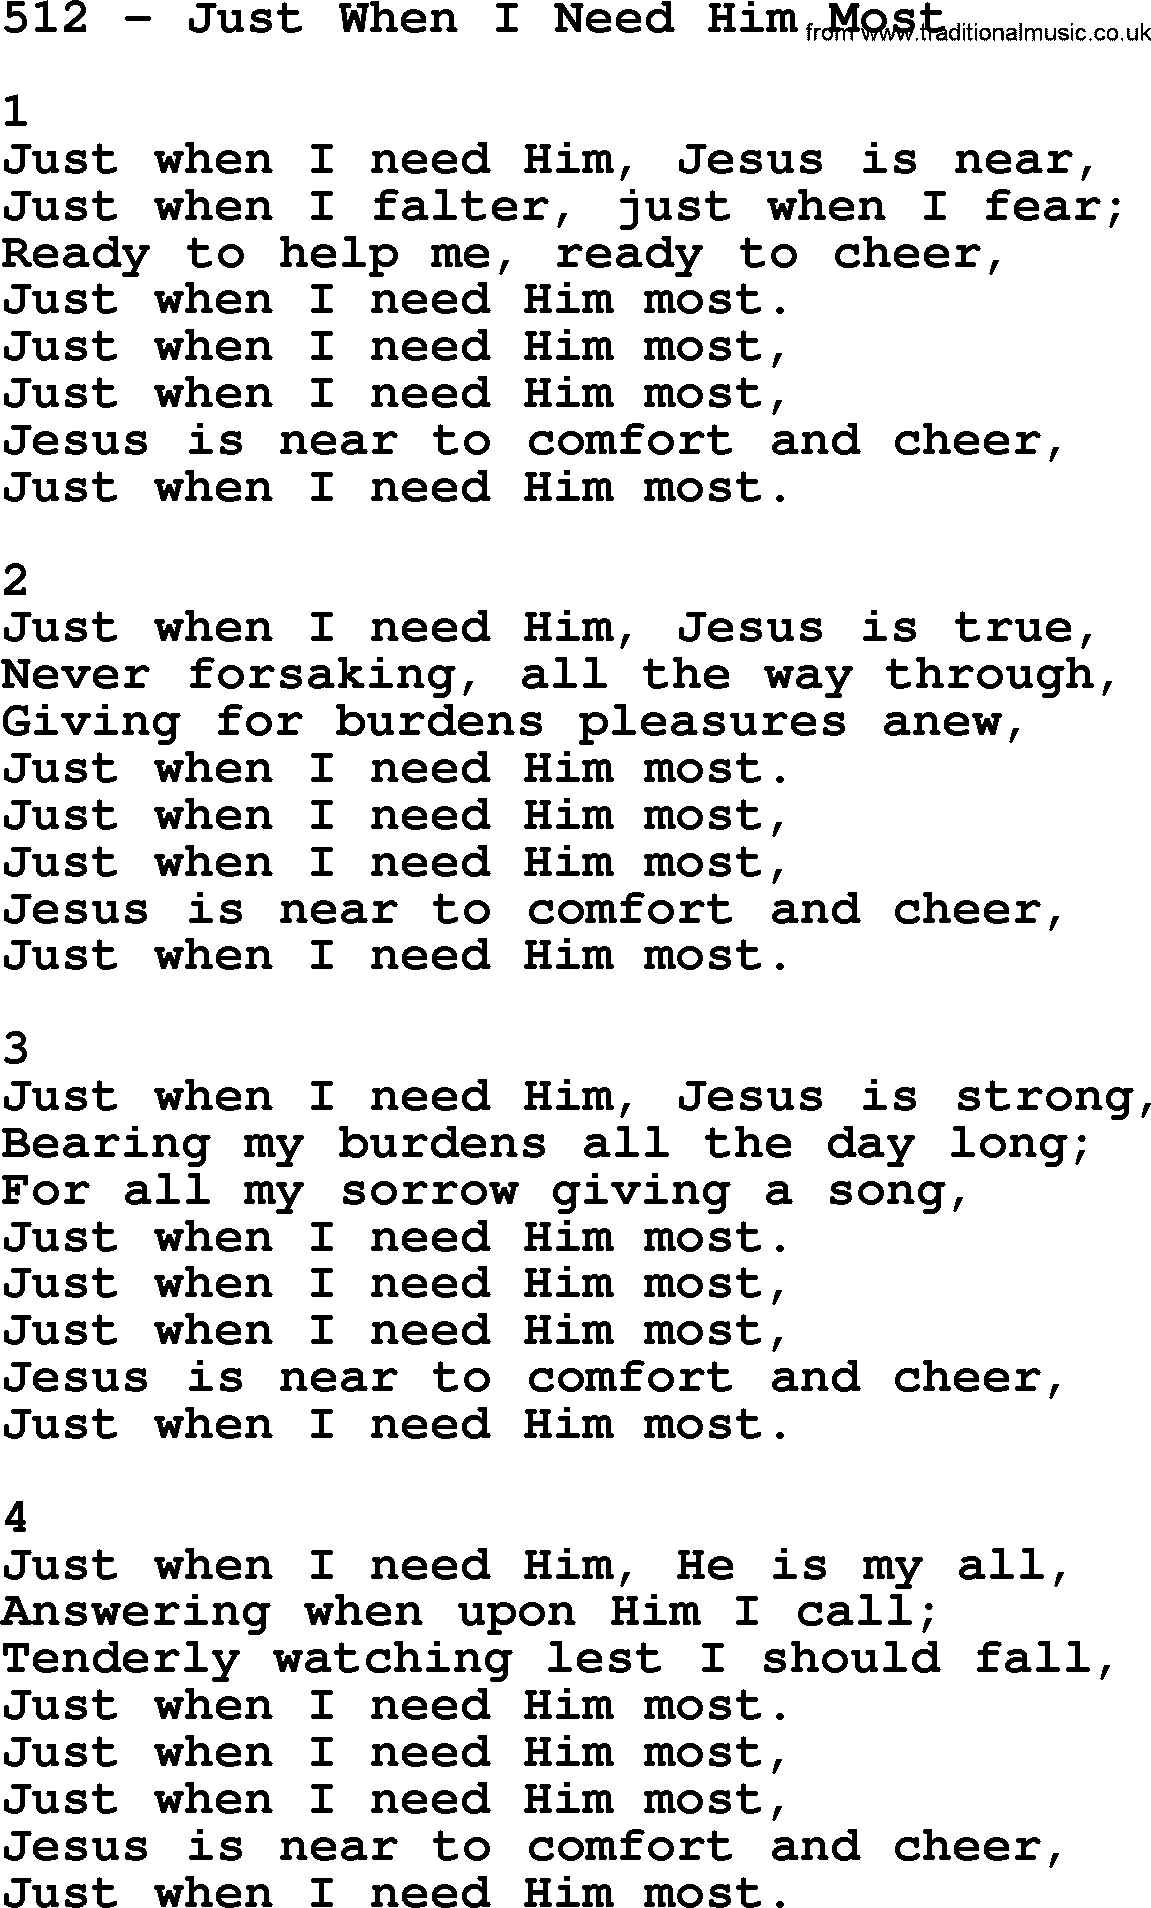 Complete Adventis Hymnal, title: 512-Just When I Need Him Most, with lyrics, midi, mp3, powerpoints(PPT) and PDF,